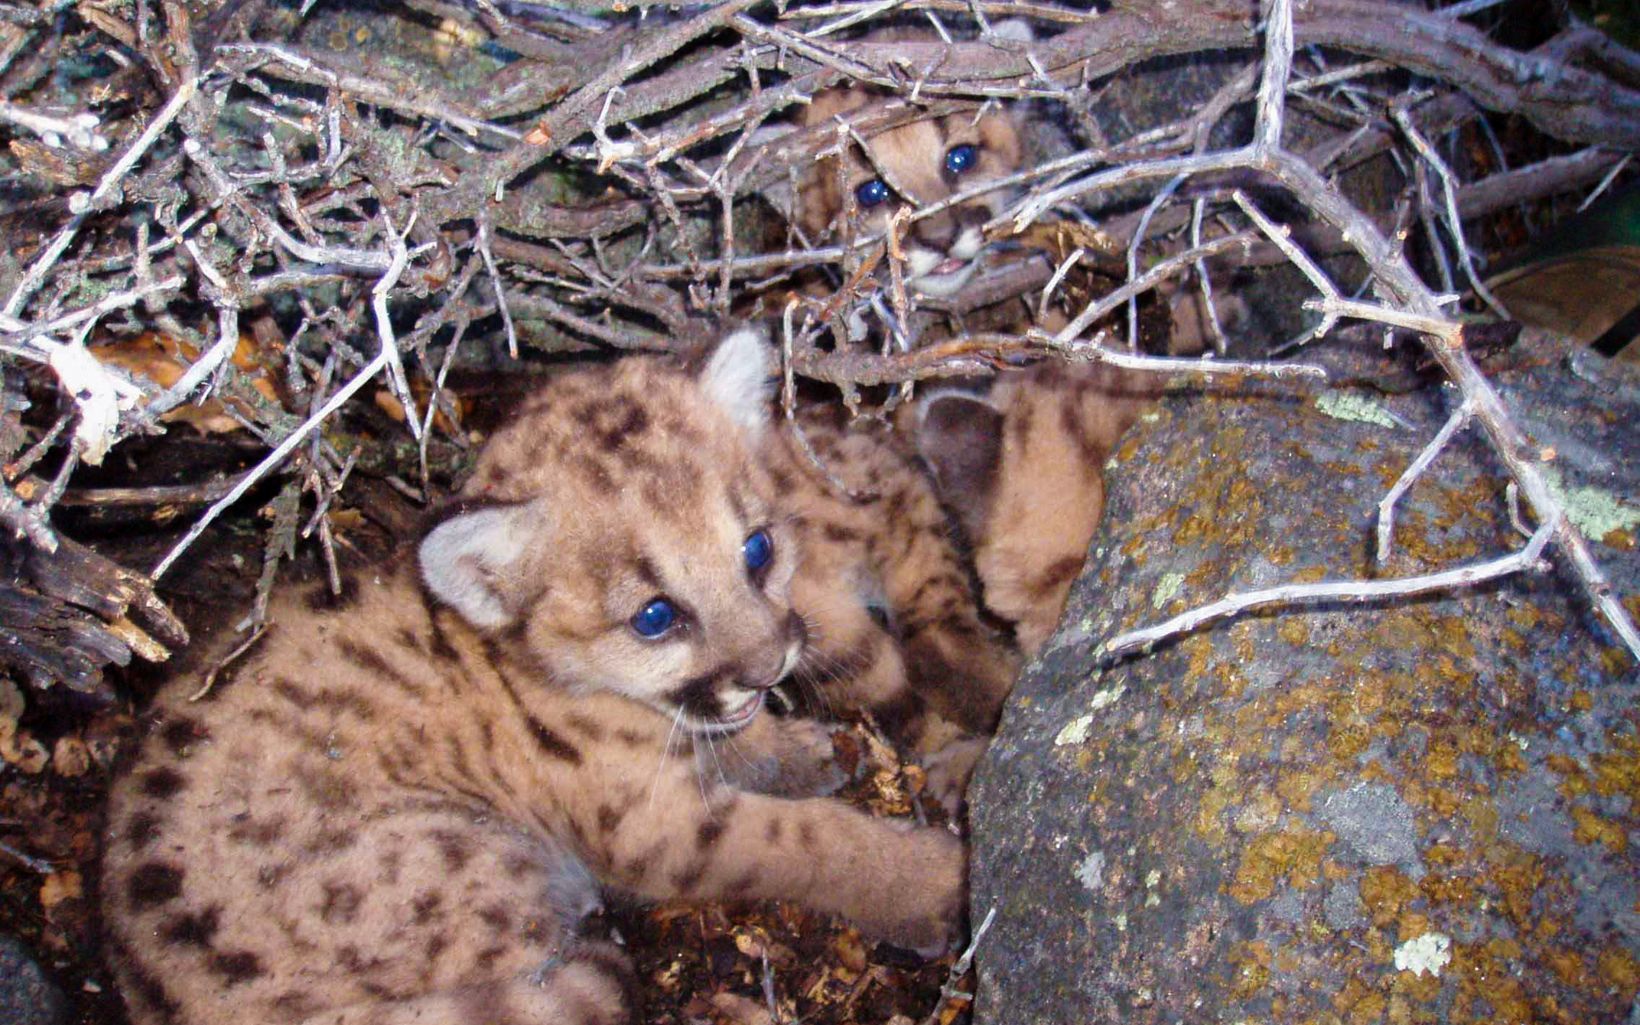 Three mountain lion kittens partially hidden among rocks and twigs.